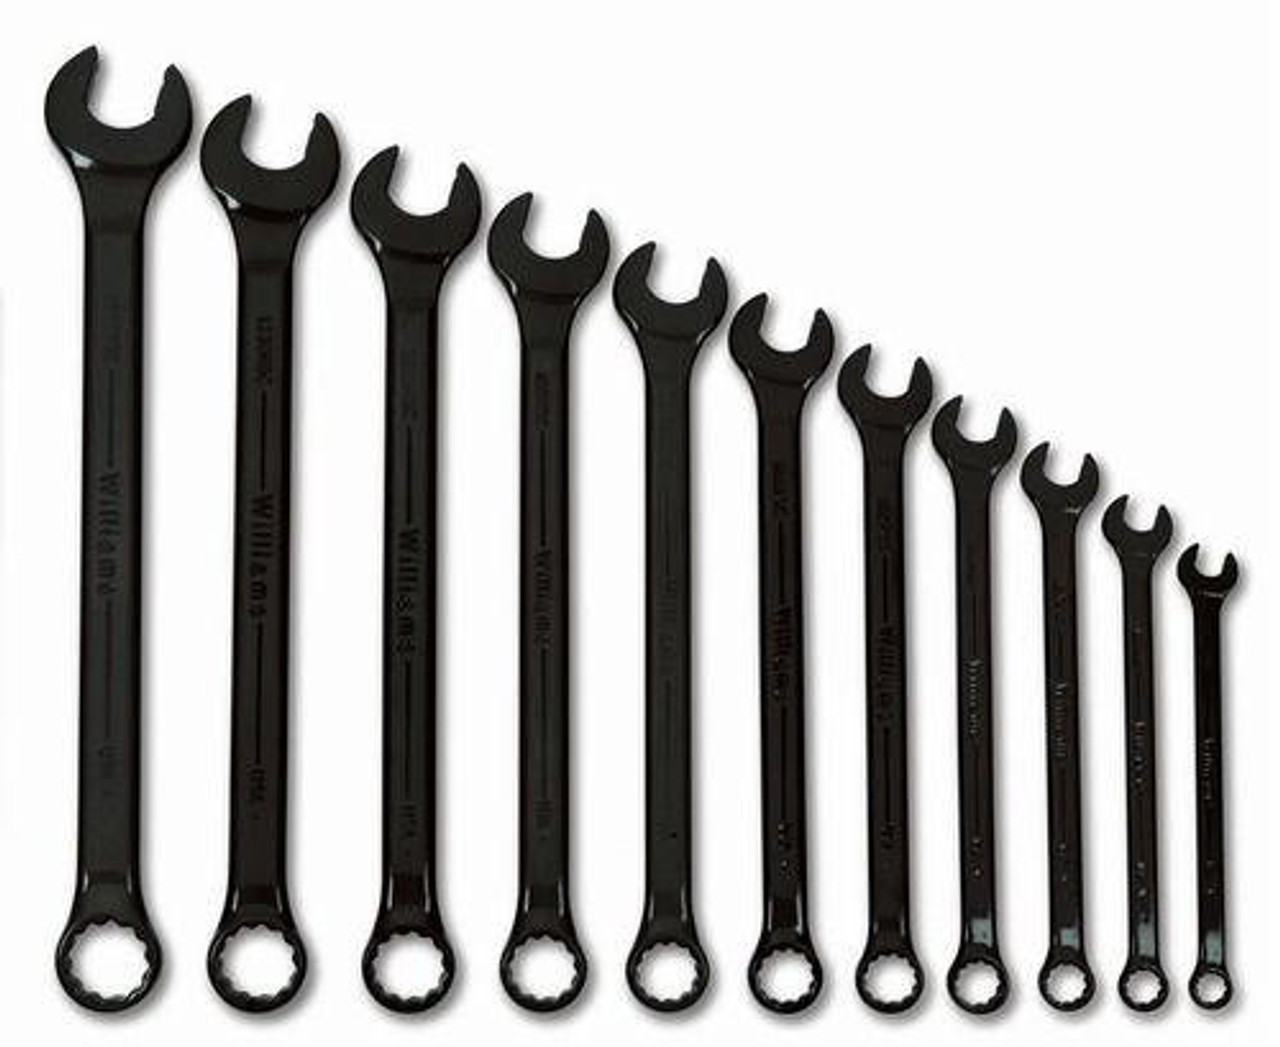 Williams 3/8 - 1" Williams Black Combination Wrench Set 11 Psc - WS-1171BSC 